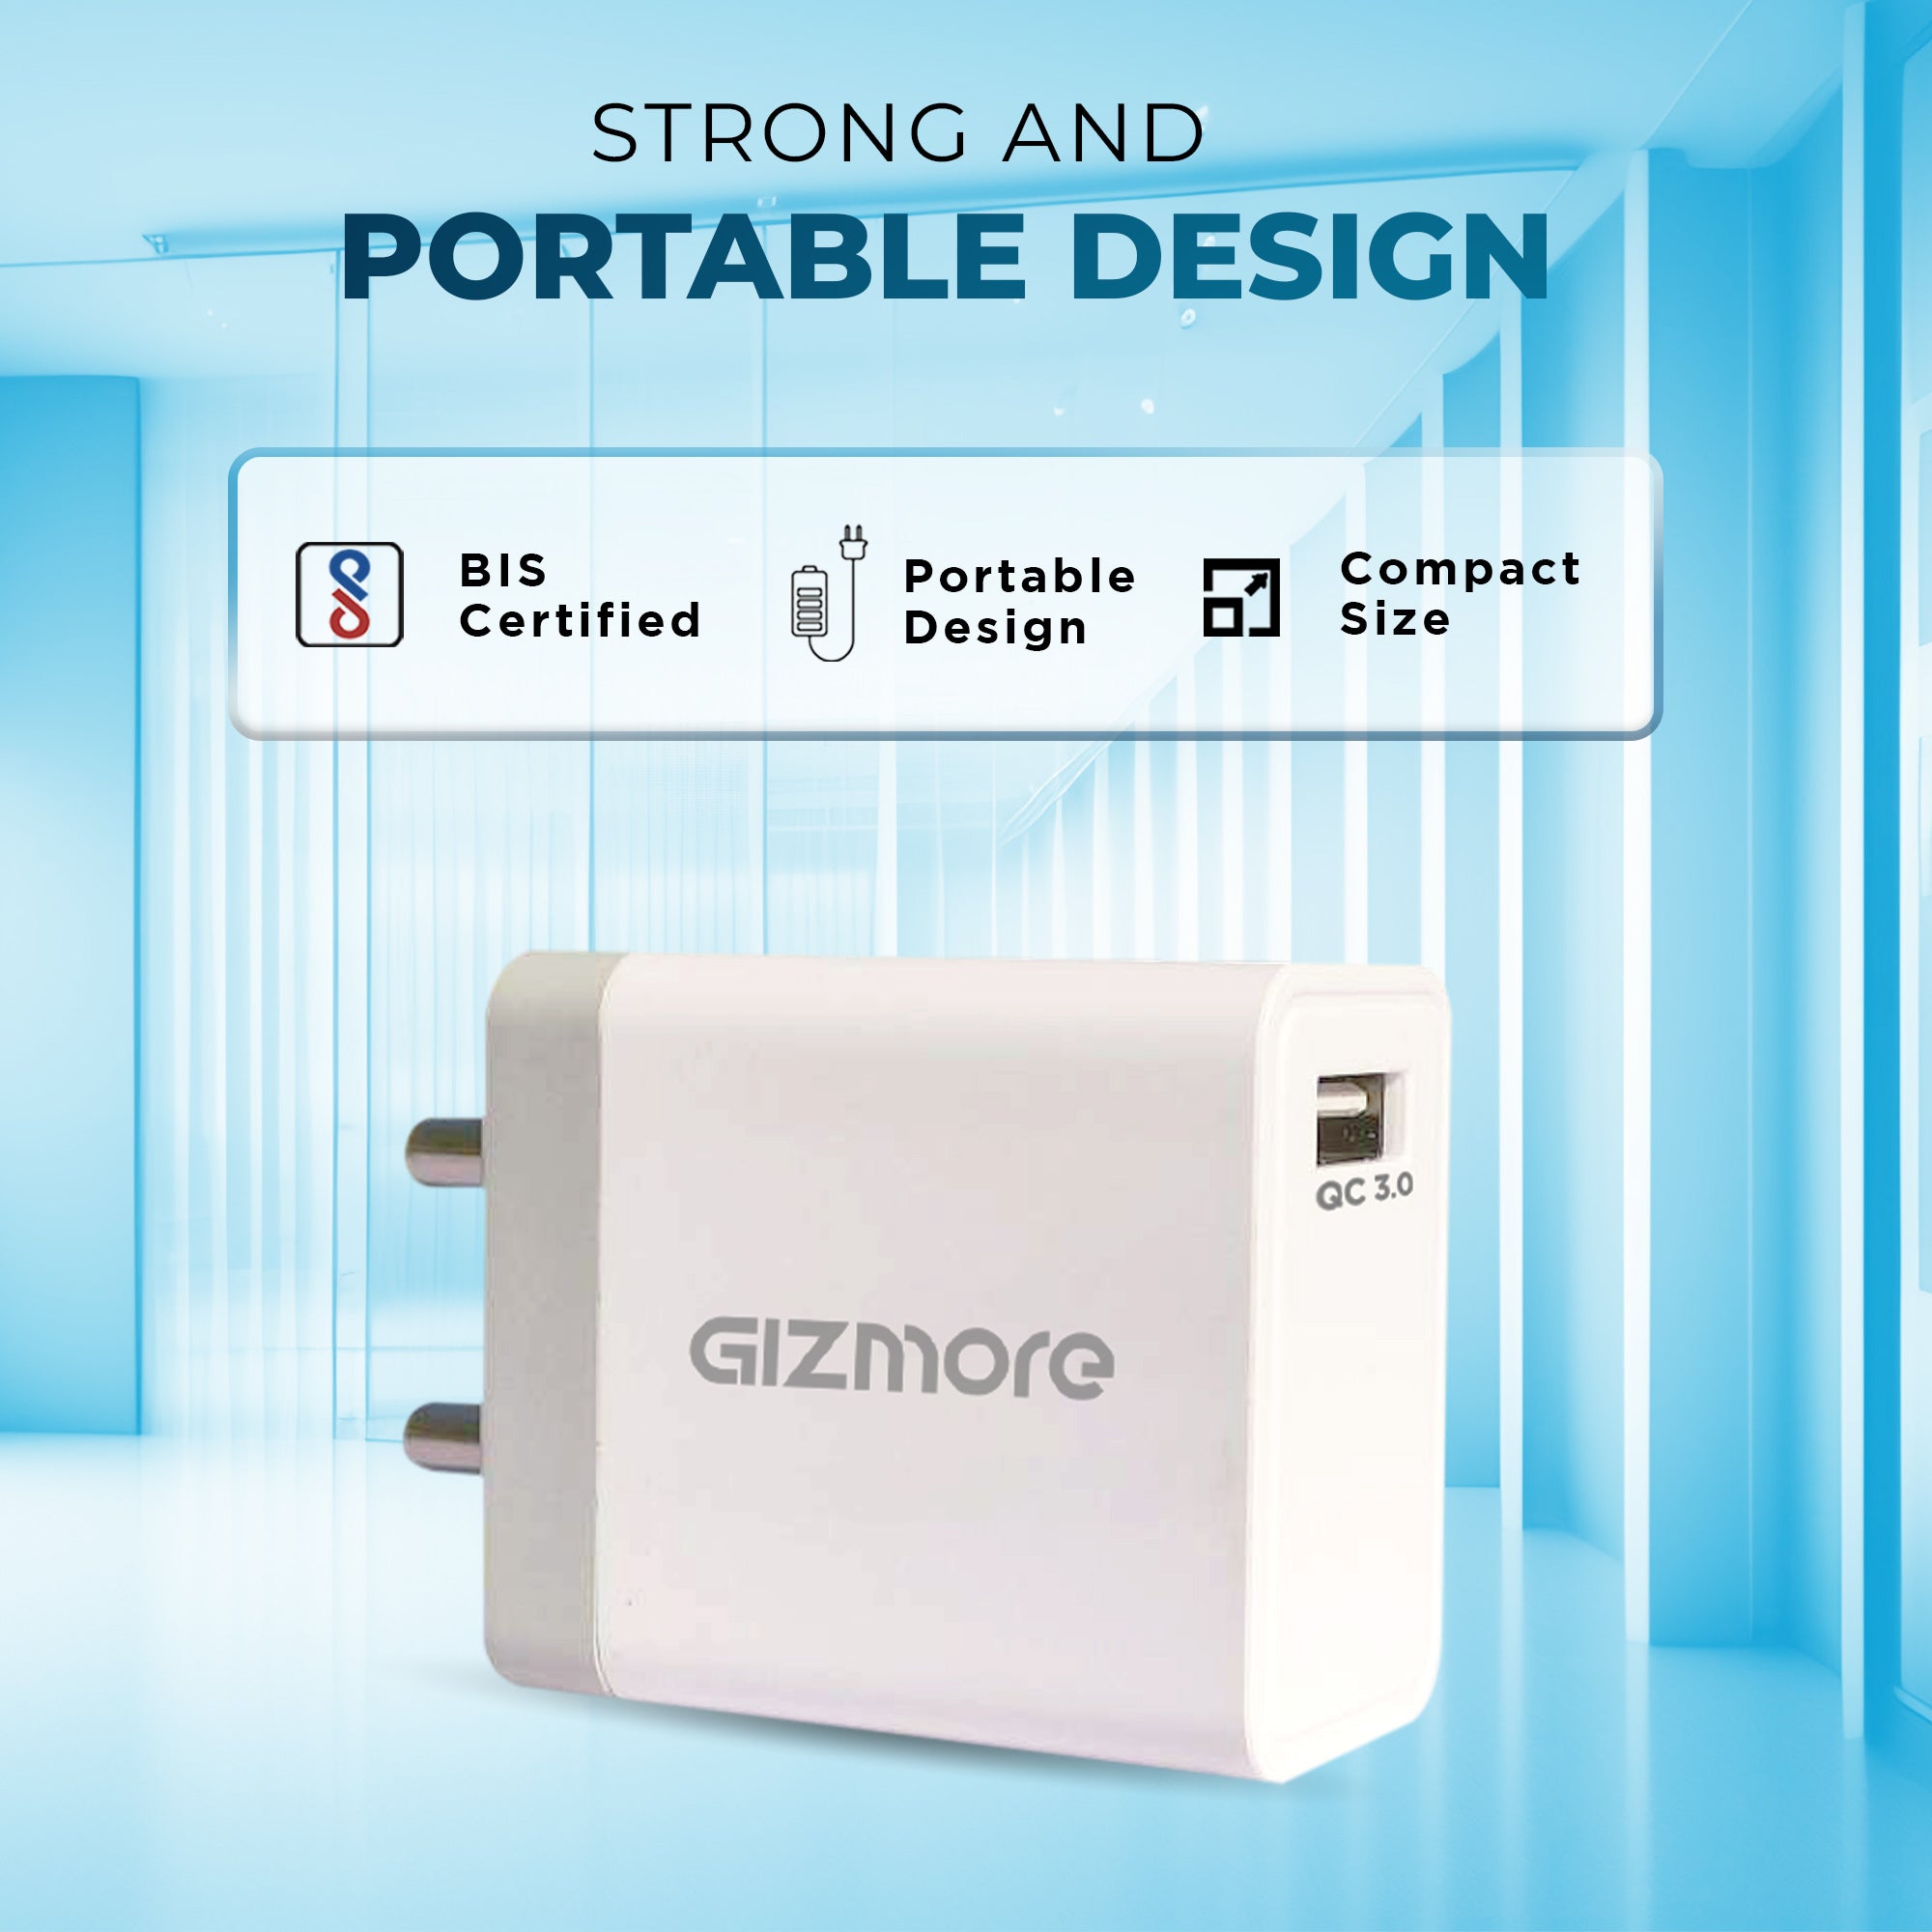 Gizmore 18 W Quick Charge 3 A Mobile PA612 Super Fast With USB Port (BIS Certified, Universal Compatible) Charger (White)